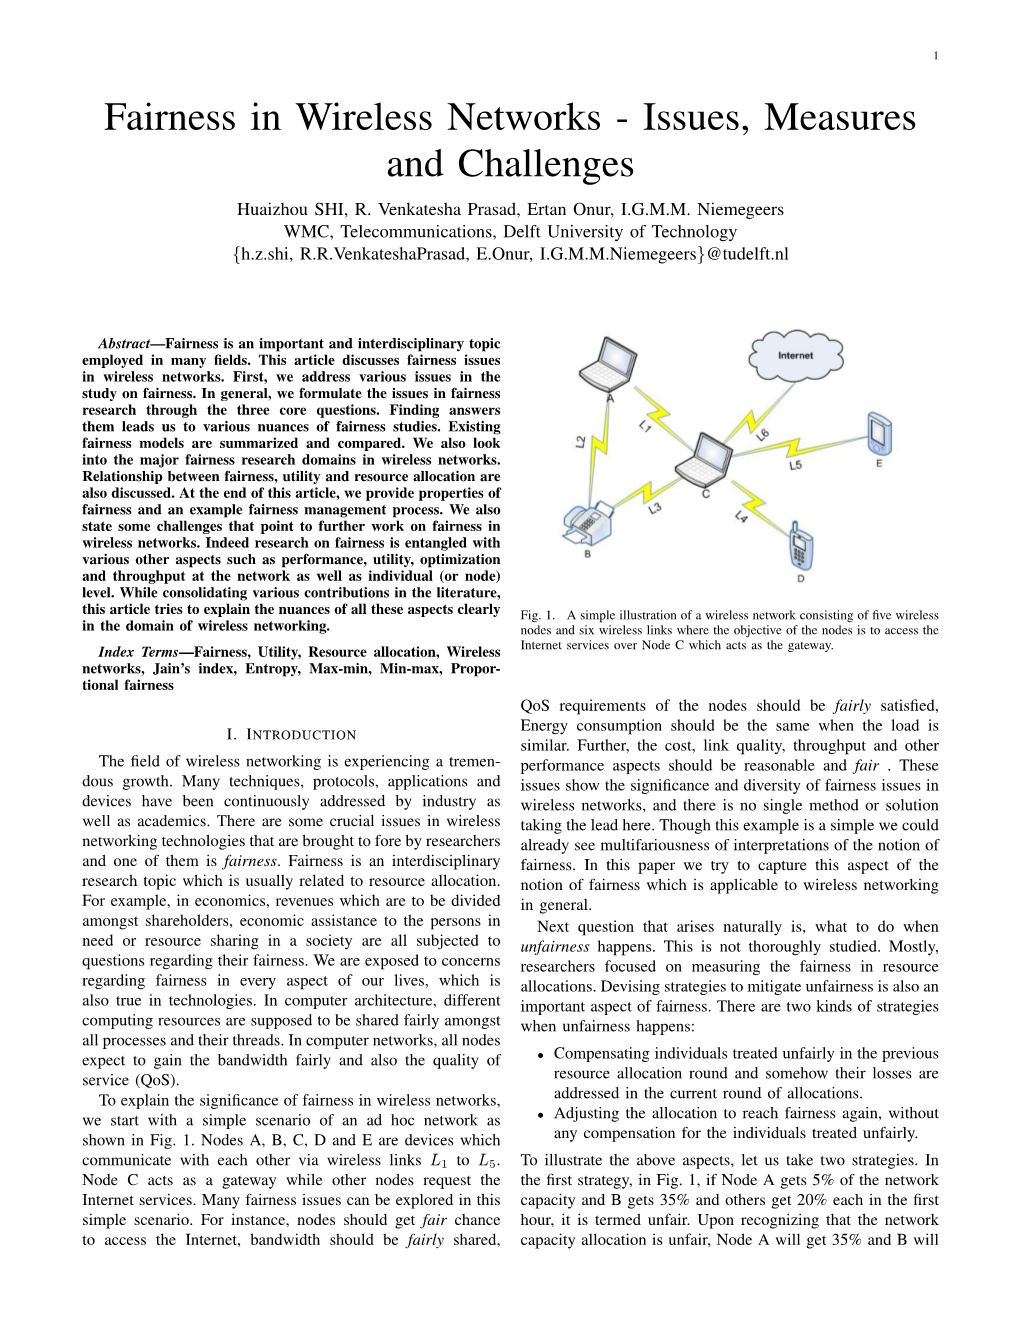 Fairness in Wireless Networks - Issues, Measures and Challenges Huaizhou SHI, R